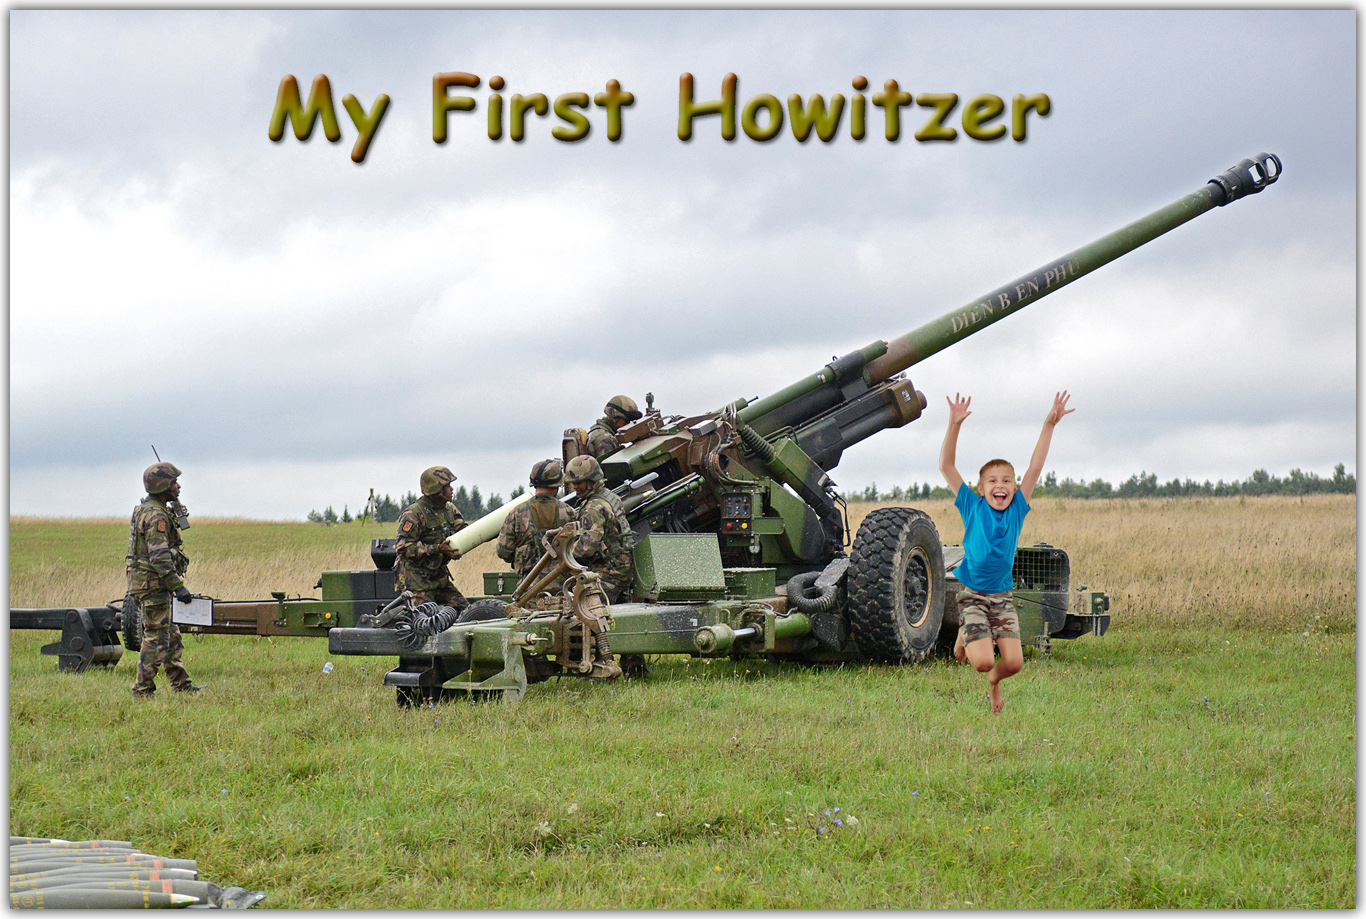 My First Howitzer